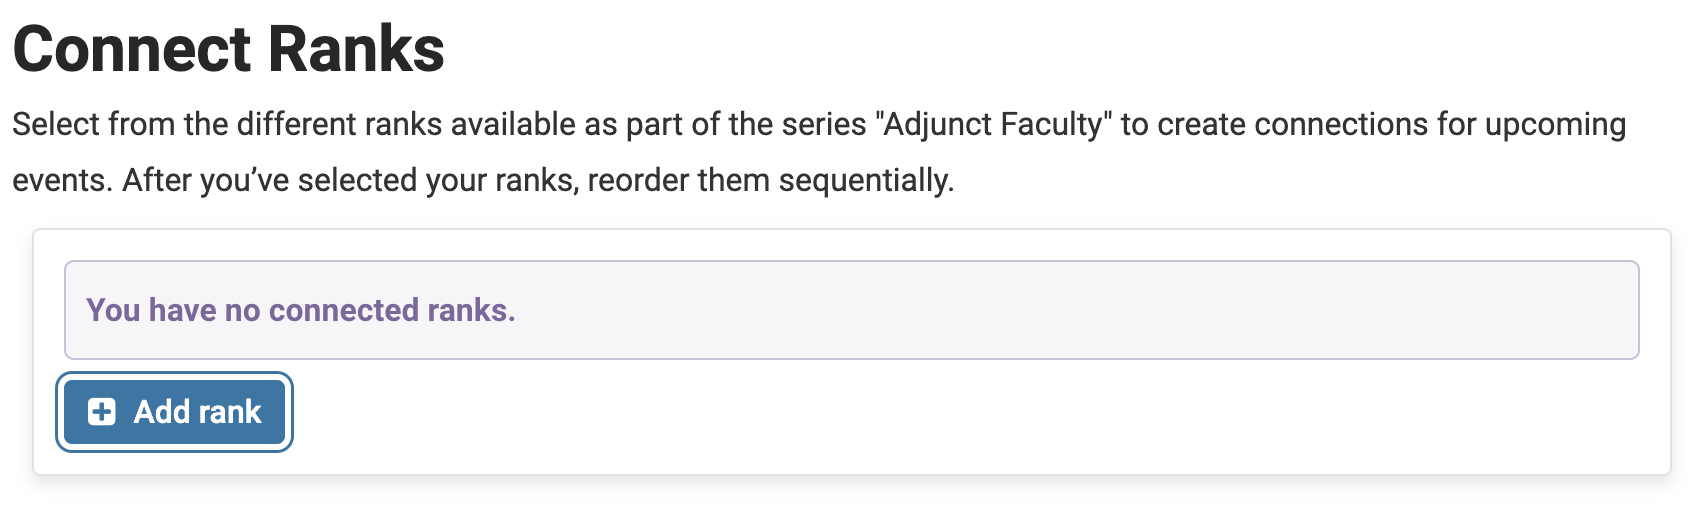 Adjunct Faculty section with Add Rank button selected below